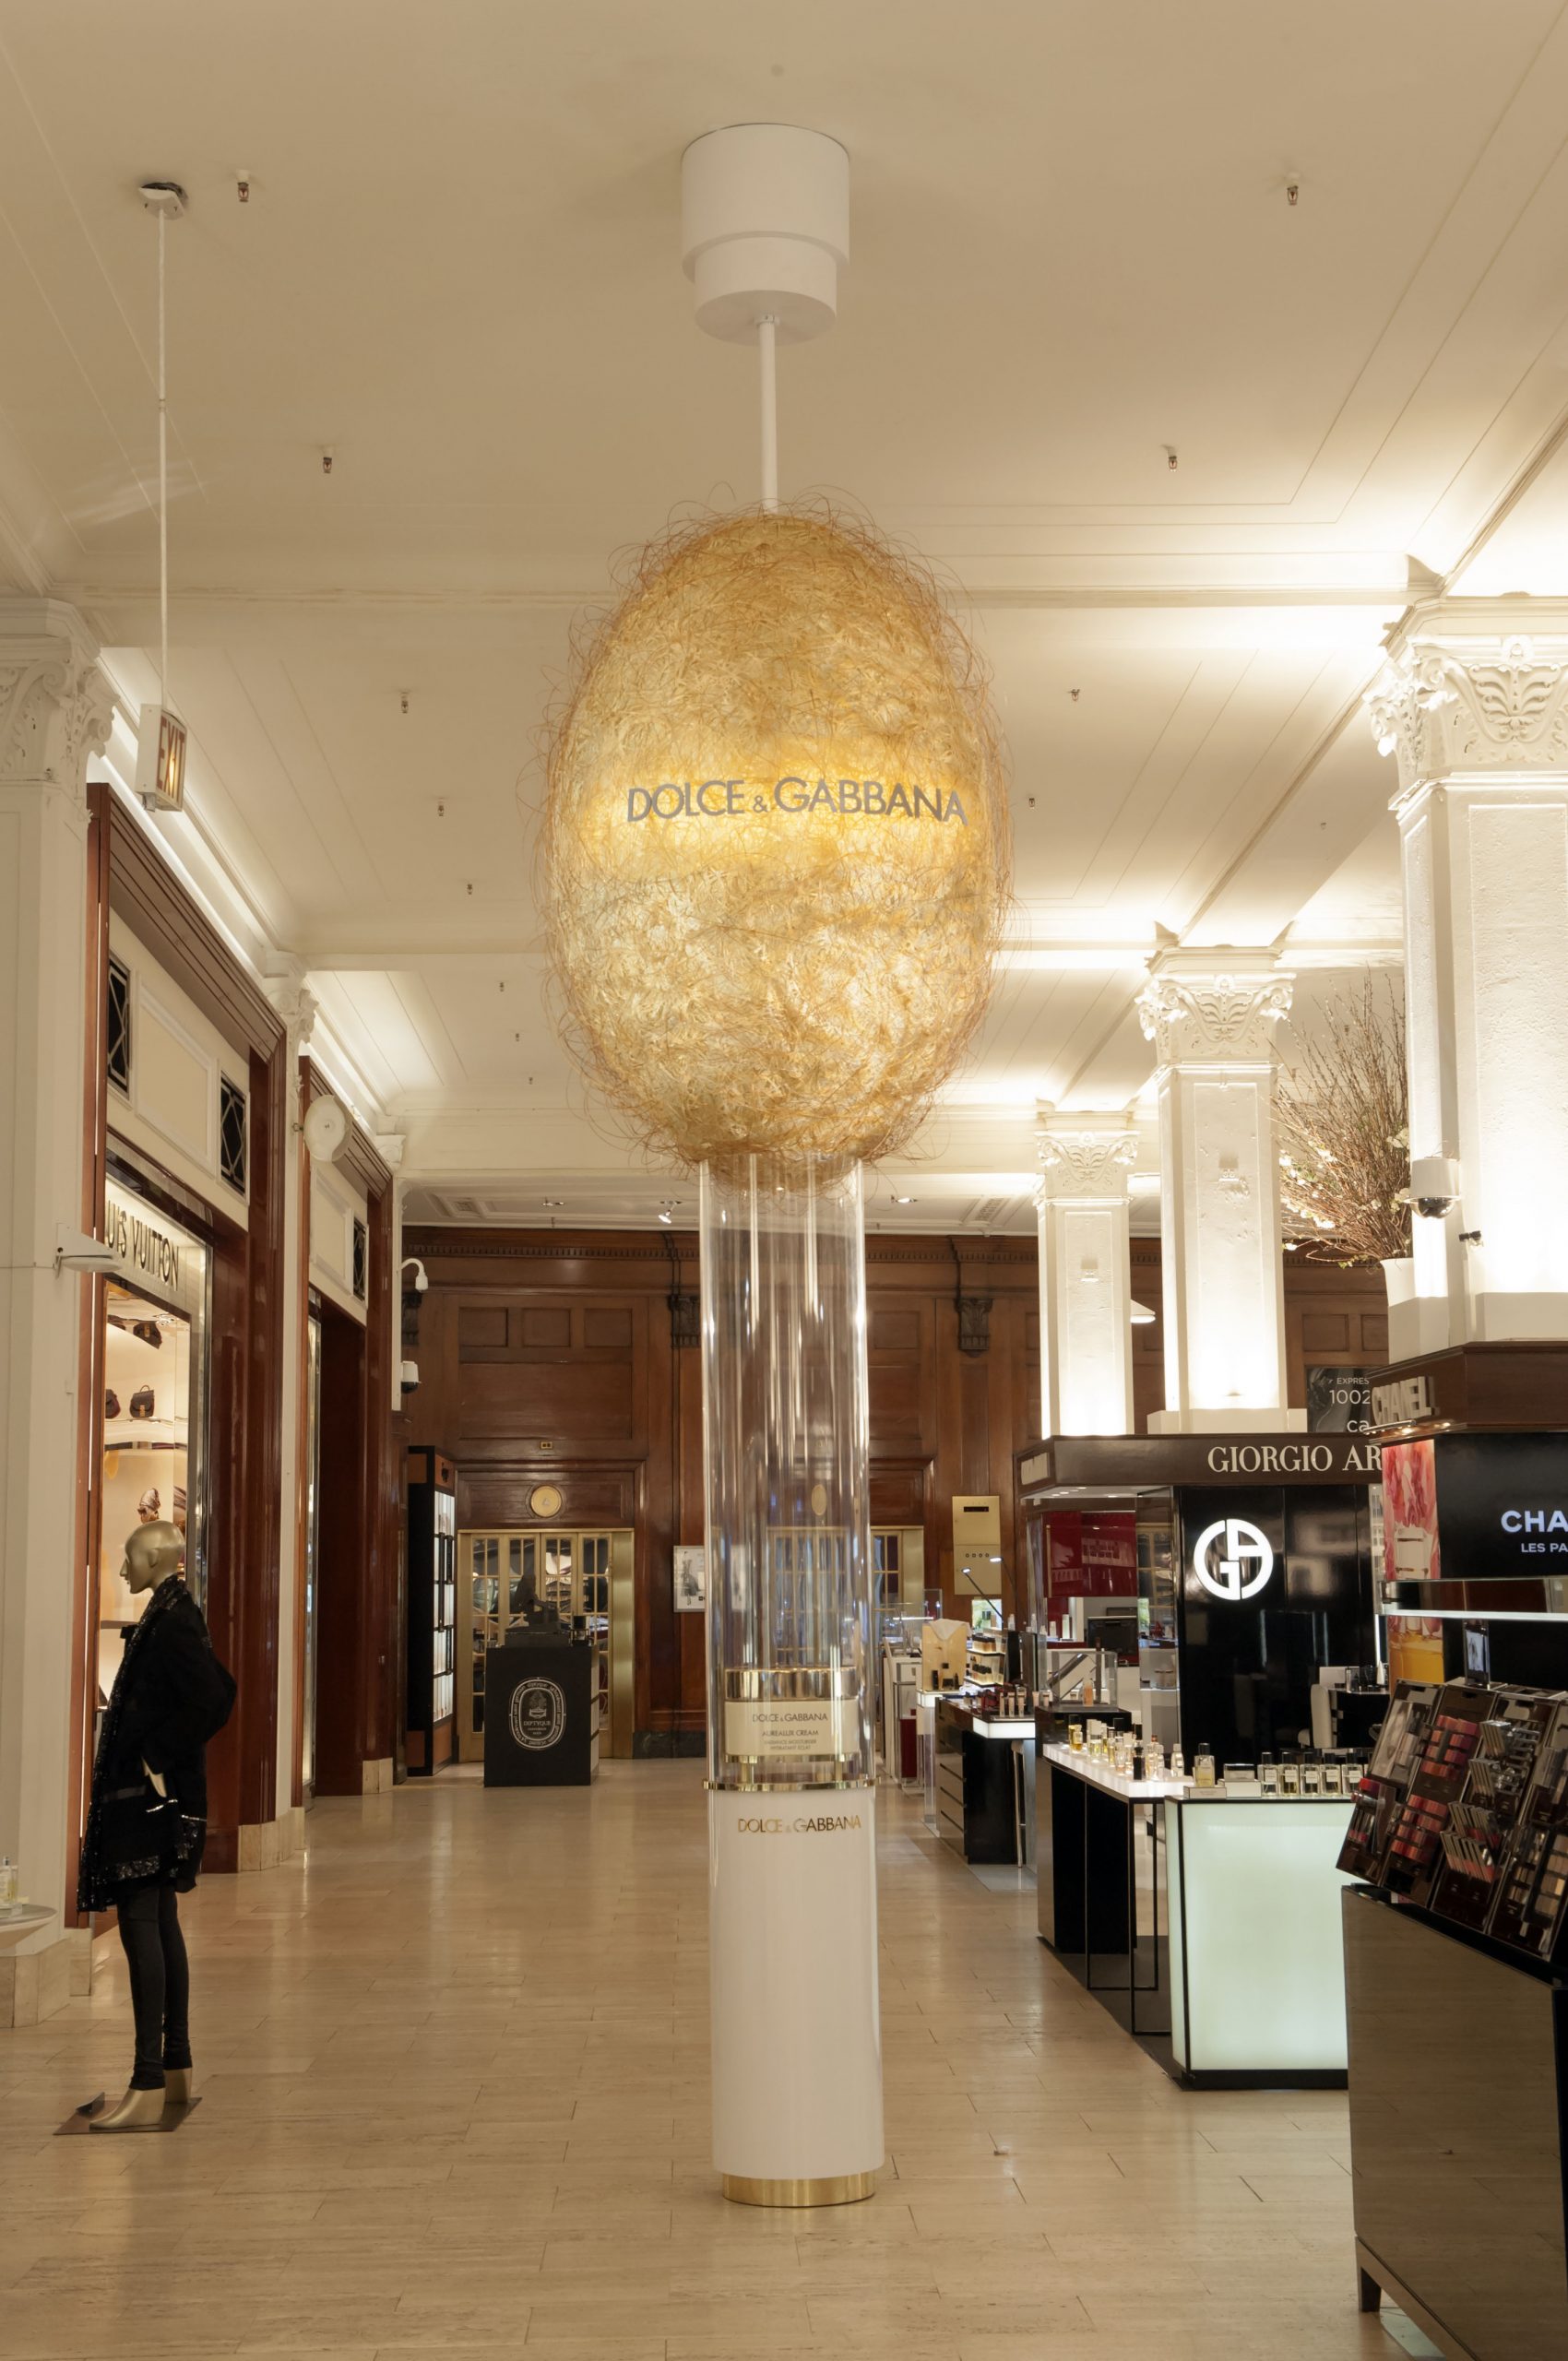 Interior of store with large hanging sculptural display made of gold material